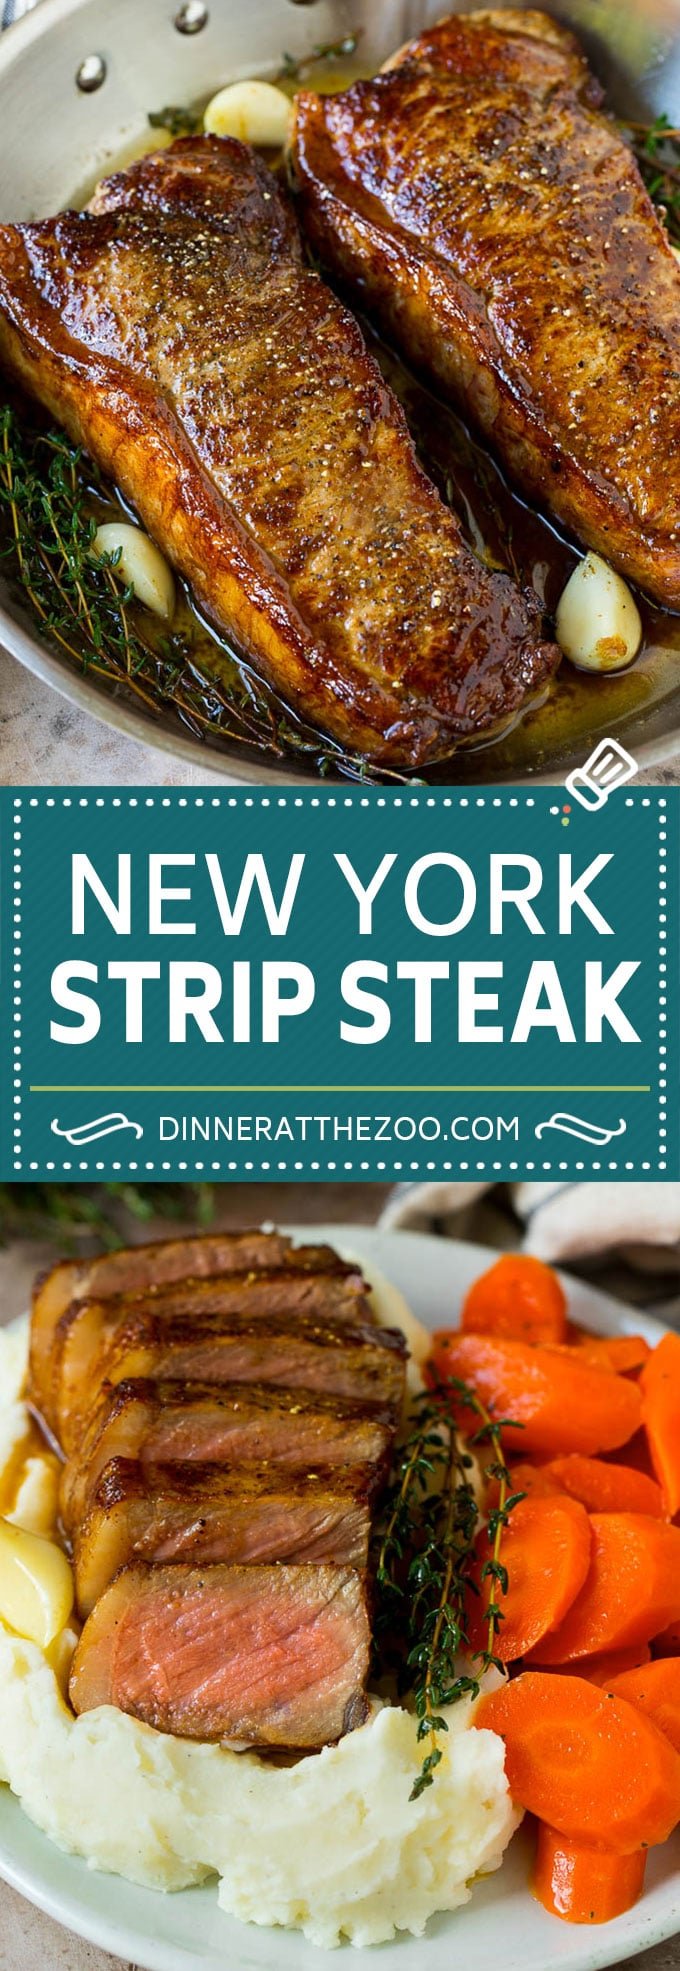 Seared New York strip steak with garlic and herb butter, an easy and elegant meal!